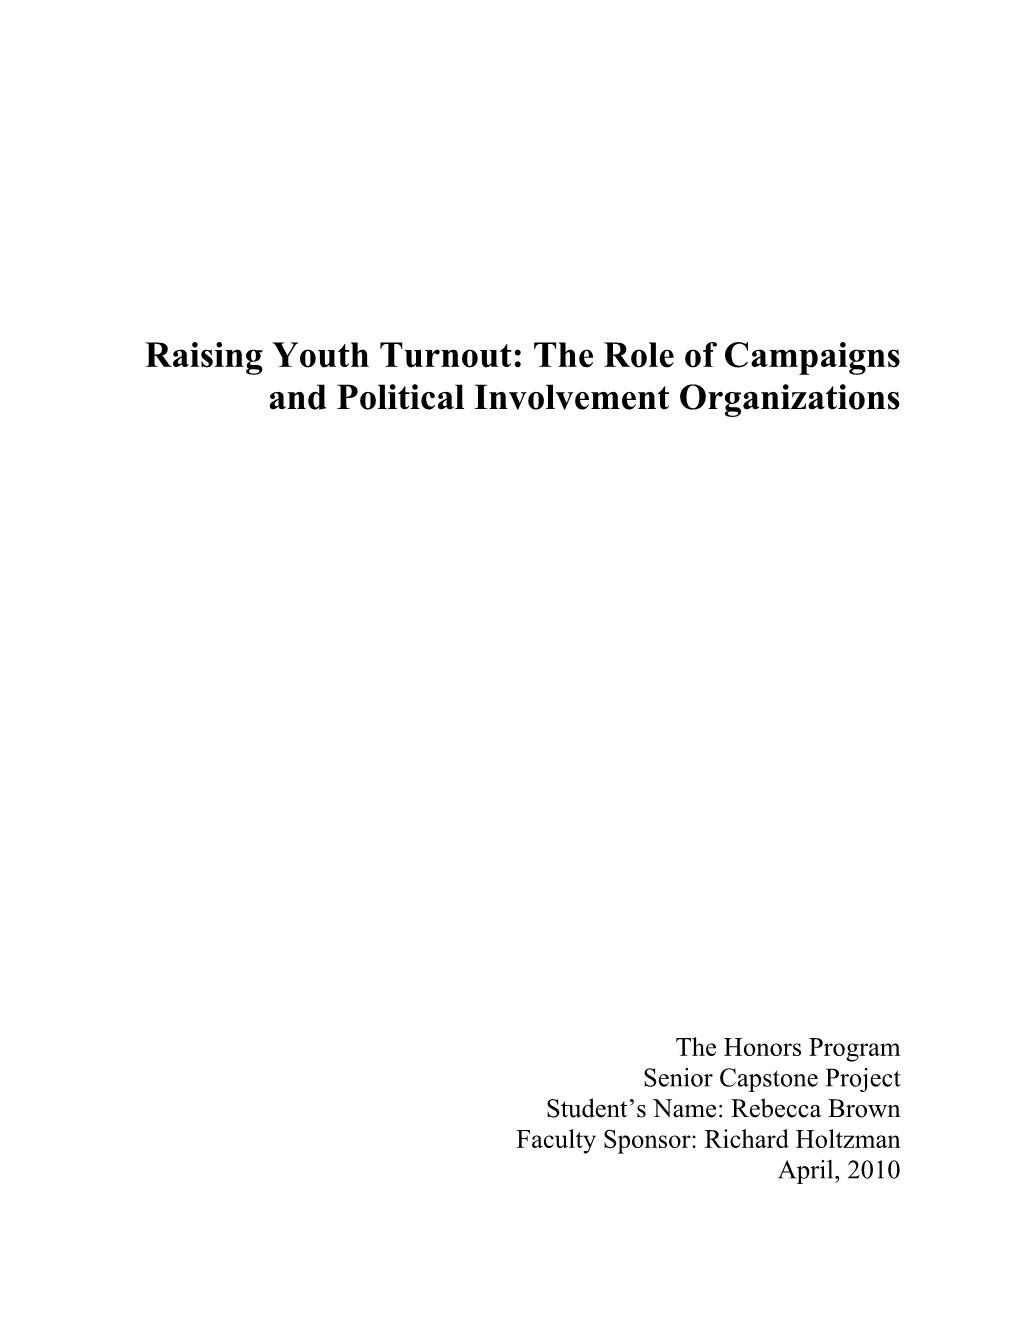 Raising Youth Turnout: the Role of Campaigns and Political Involvement Organizations